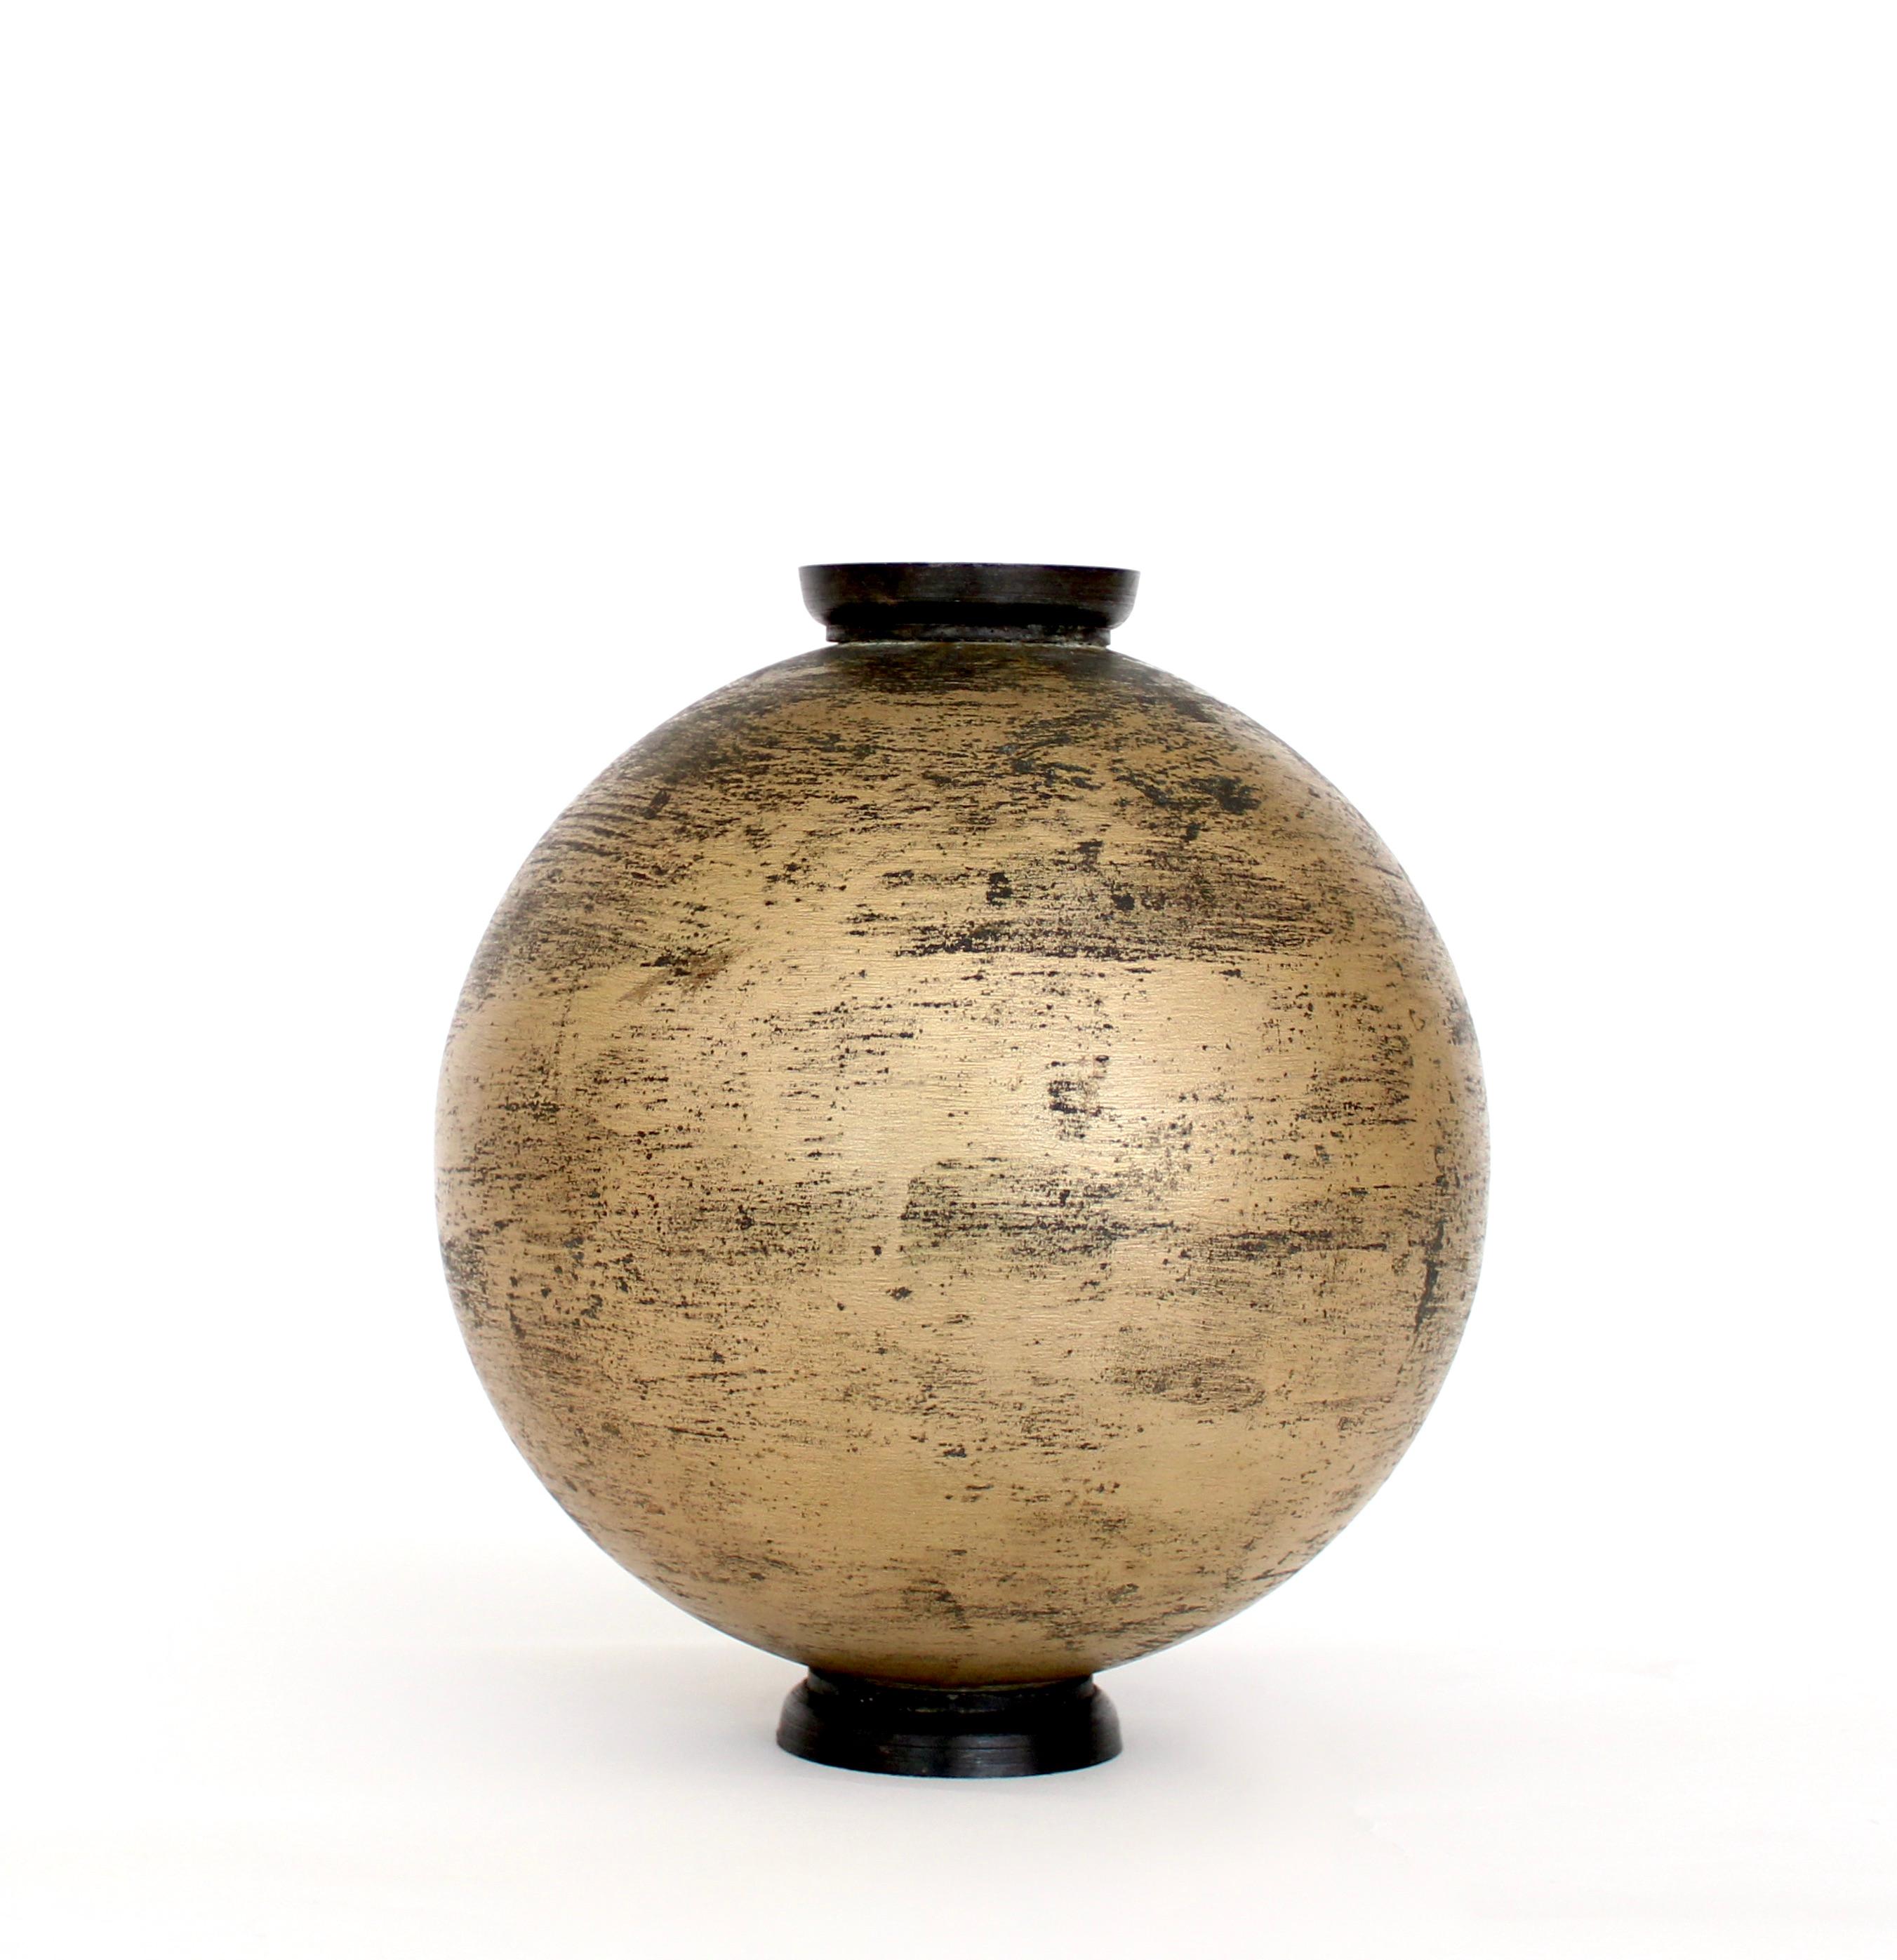 Italian artist Lorenzo Burchiello patinated and incised aluminum vase. 
Minimalist in form and surface decoration. Gorgeous patina.
Excellent execution of the patina with intended variations throughout as it is hand made by the artist. 
Will hold